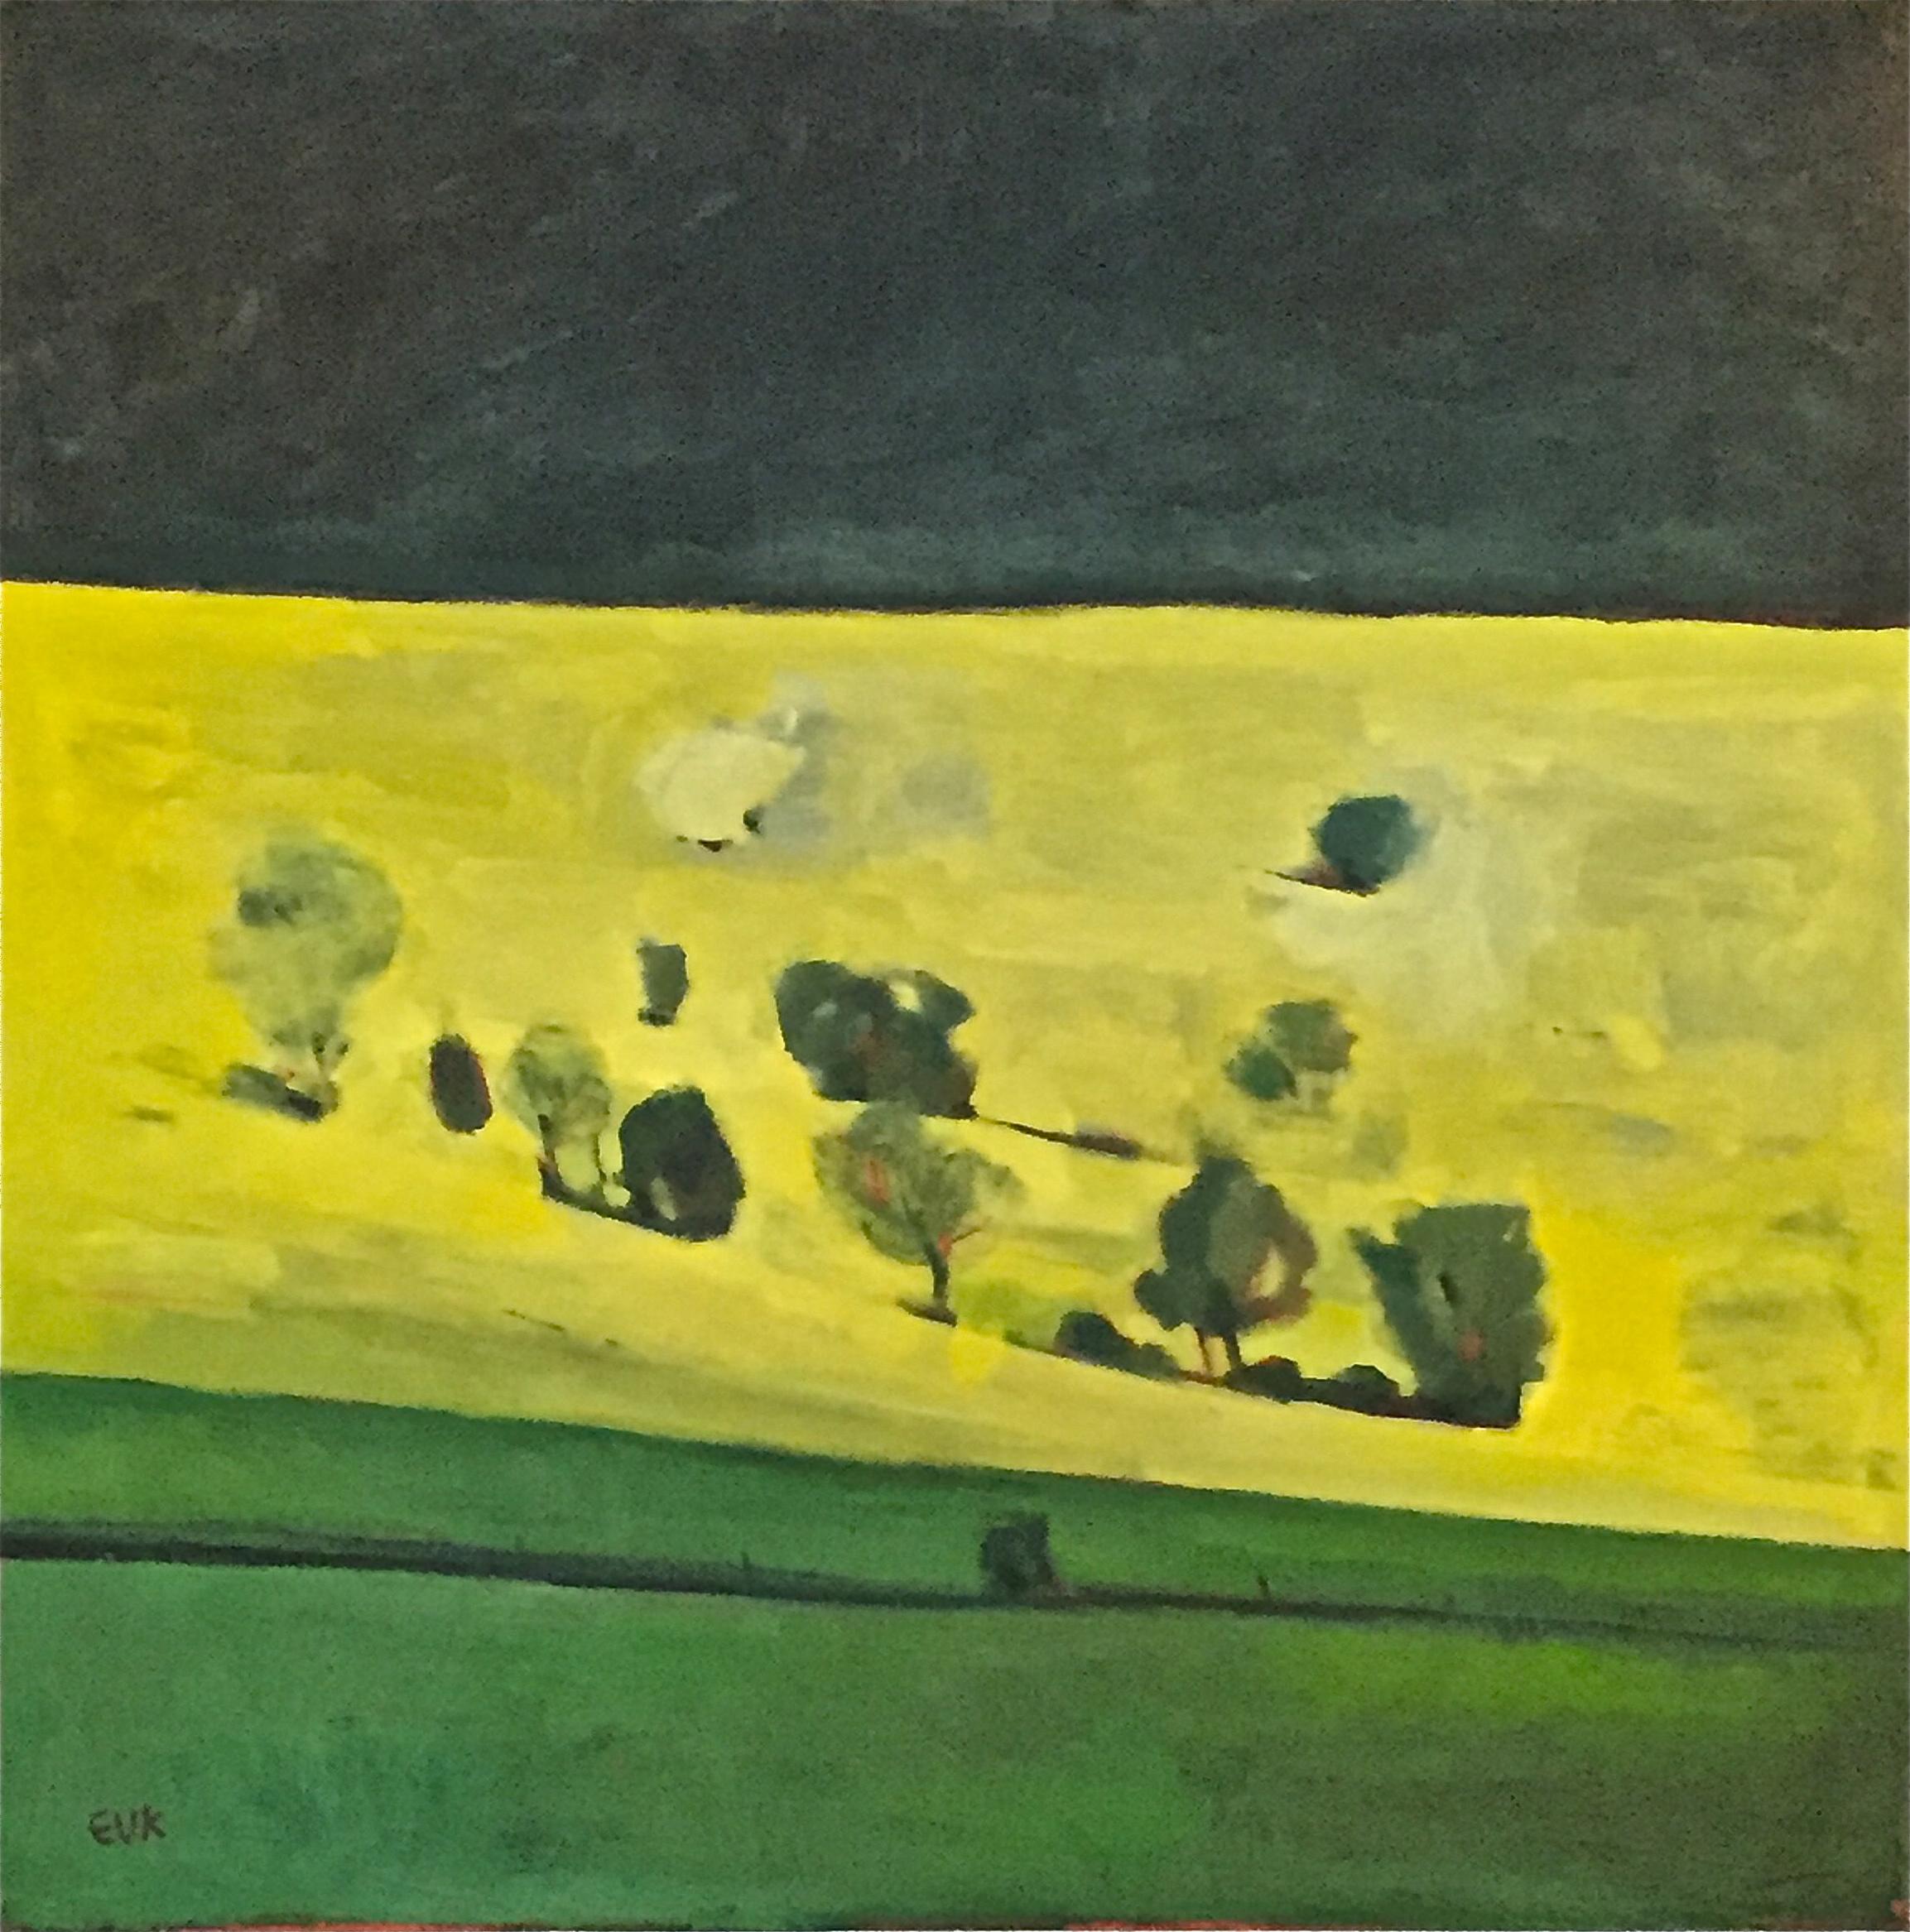 Black, Yellow, Green is a vibrant abstract landscape painting of a field filled with oil seed rape in full blossom set against a darkening sky creating by artist Elaine Kazimierczuk.
Medium: Oil on Canvas
Colours: Black, Yellow and Green.
Size: 76 x